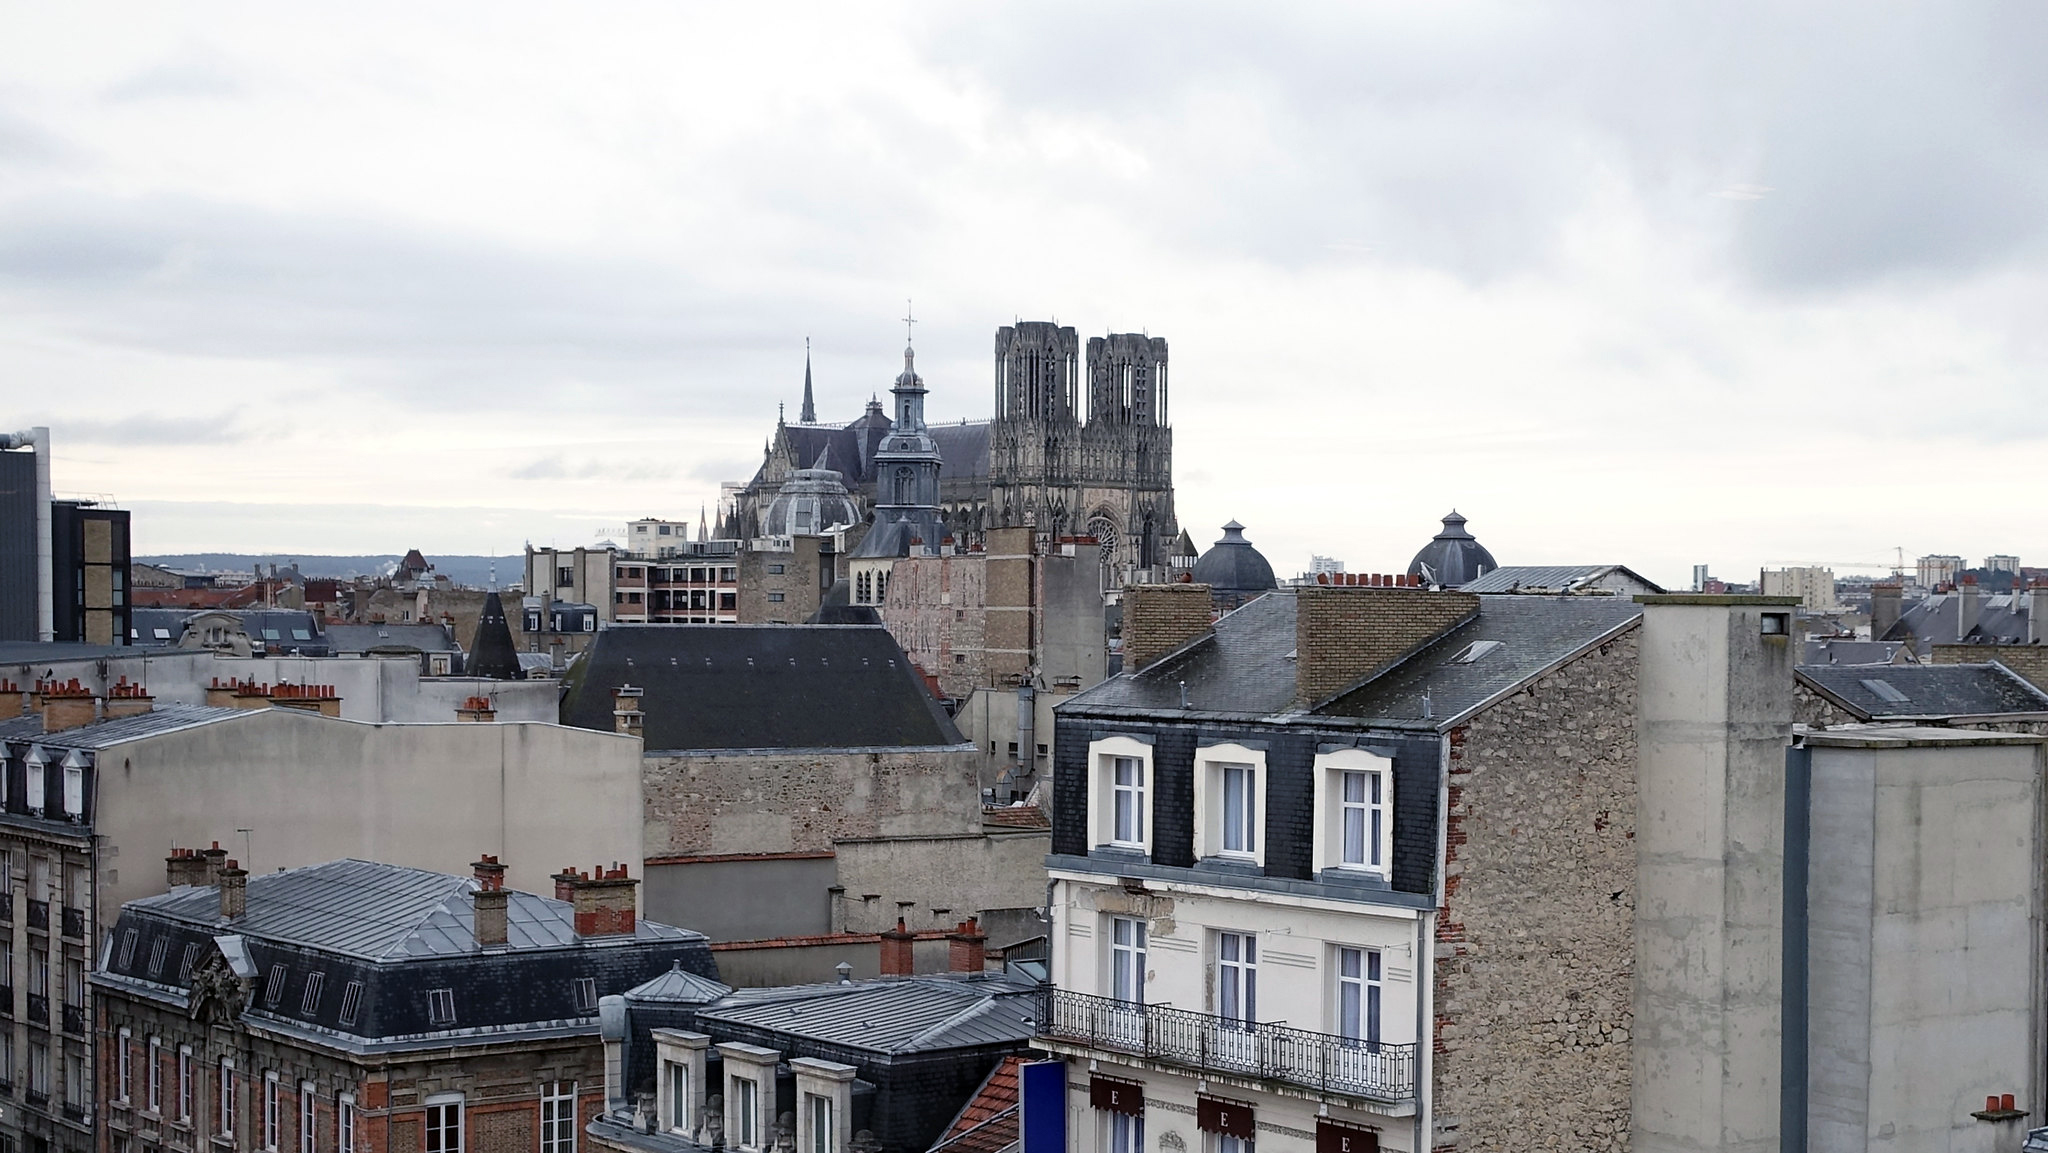 View of Reims cathedral over the rooftops of the city in 2014 (photo: Dr. Steven Zucker, CC BY-NC-SA 2.0)